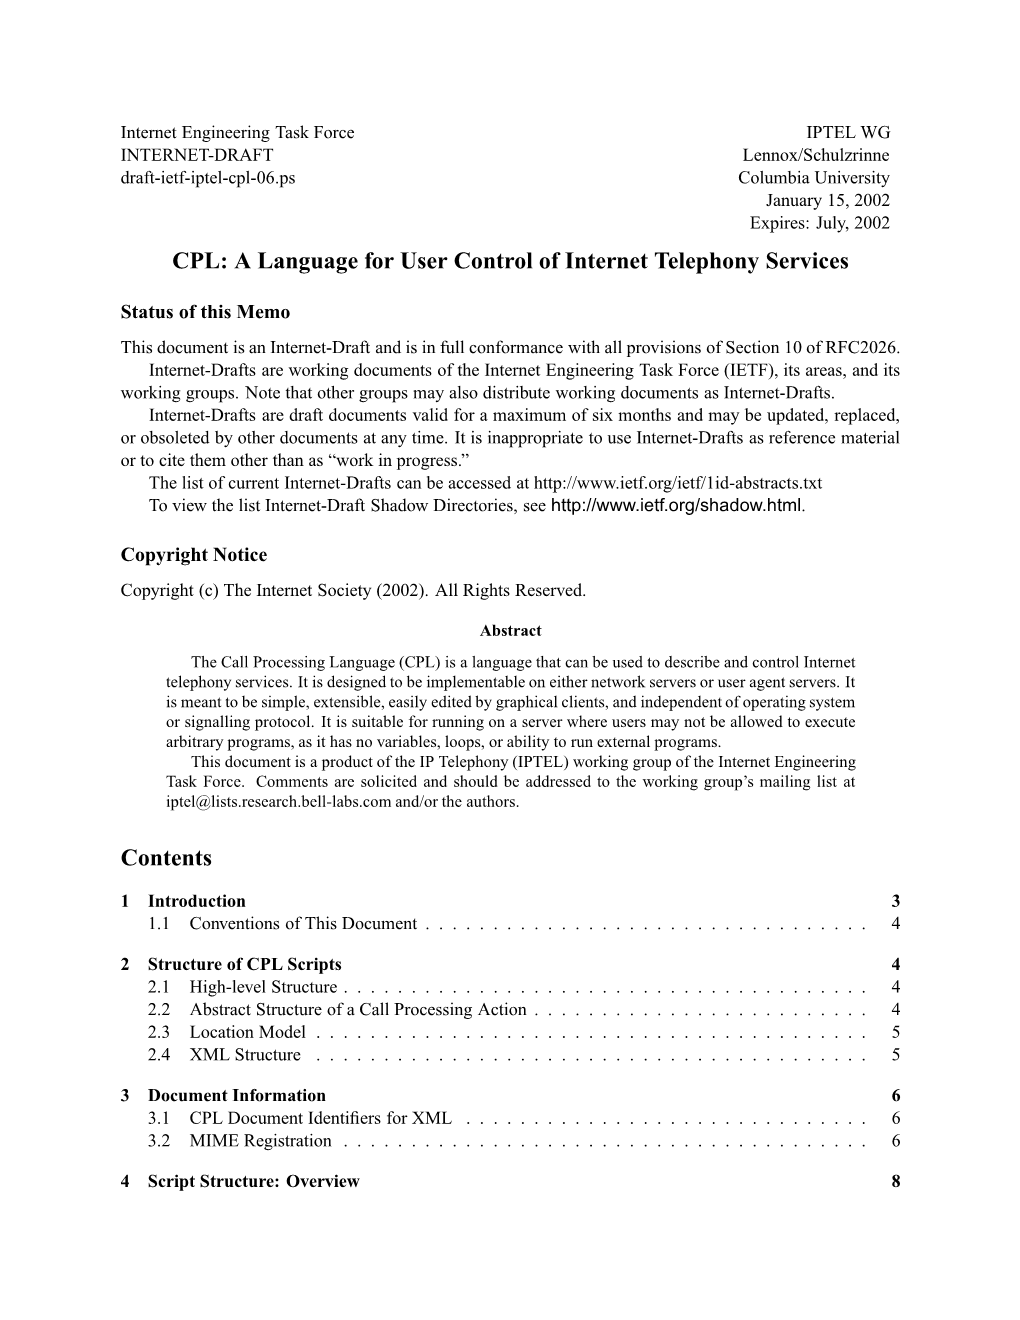 Cpl-06.Ps Columbia University January 15, 2002 Expires: July, 2002 CPL: a Language for User Control of Internet Telephony Services